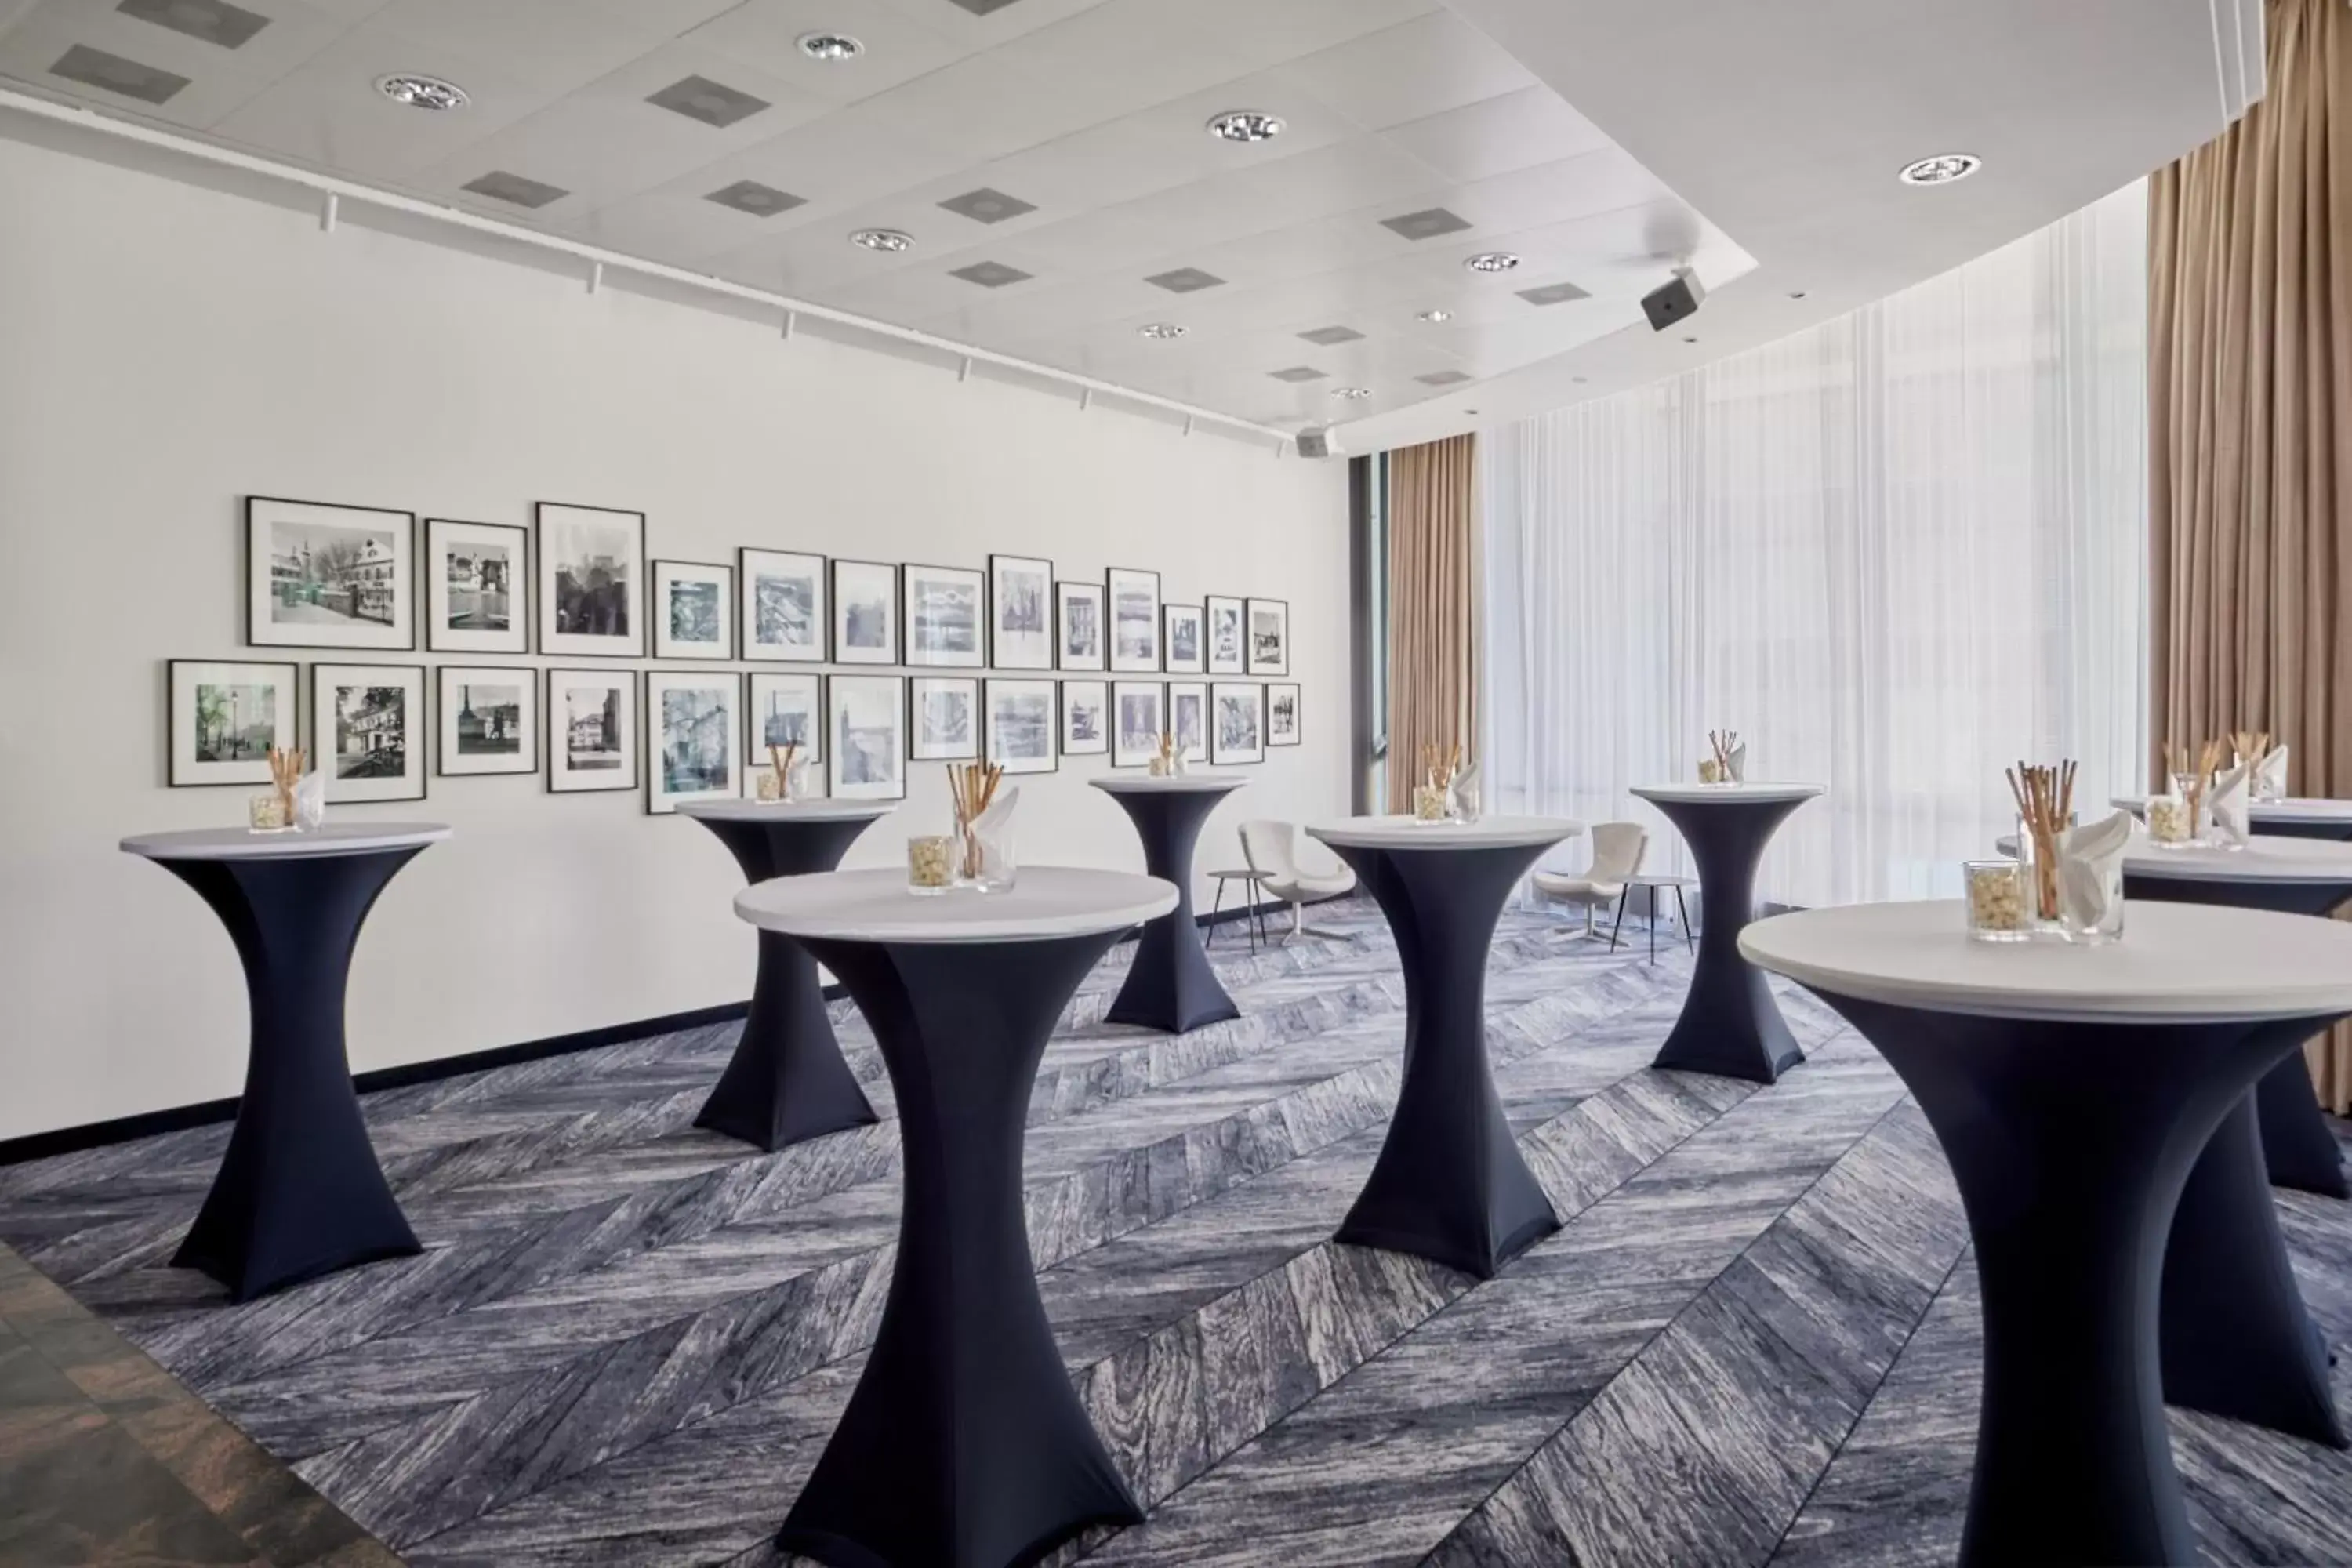 Meeting/conference room in Basel Marriott Hotel